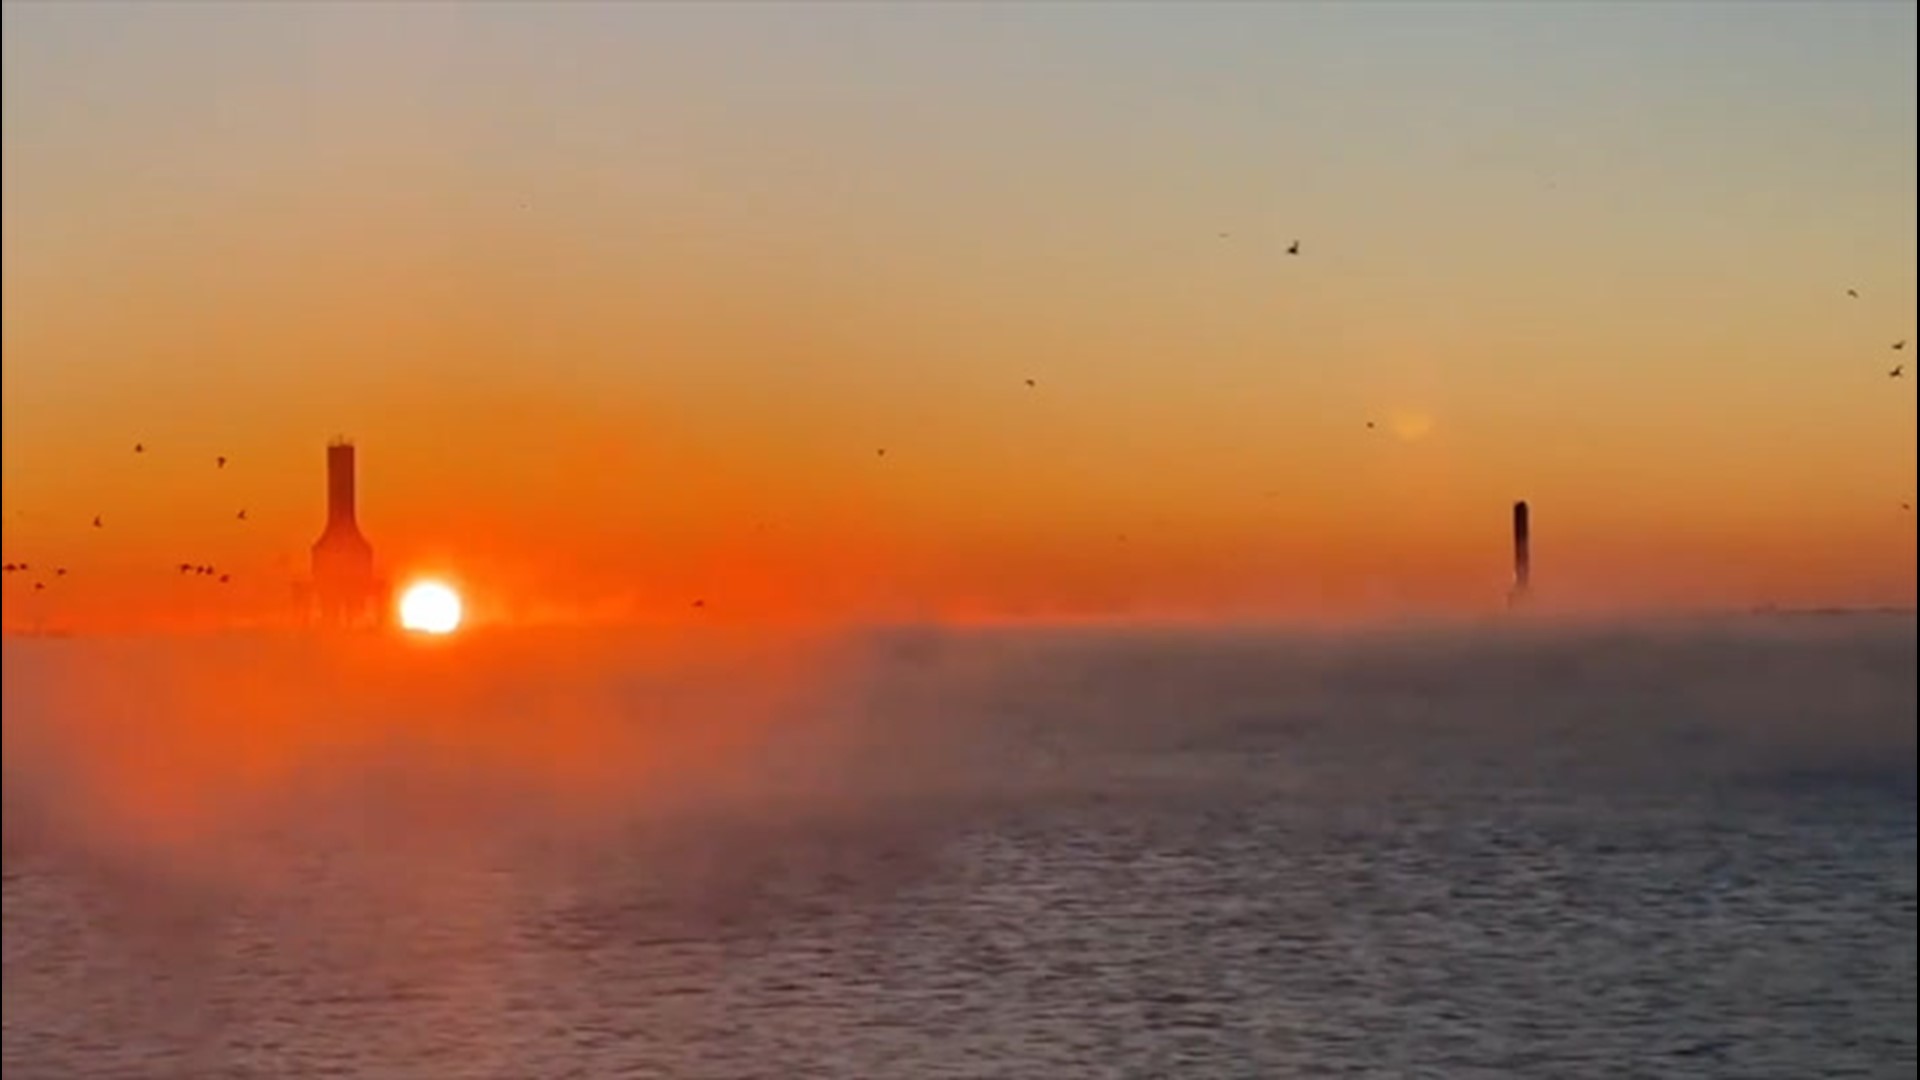 Saturday morning in Port Washington was brutally cold, but those who were awake were greeted by a beautiful sunrise.